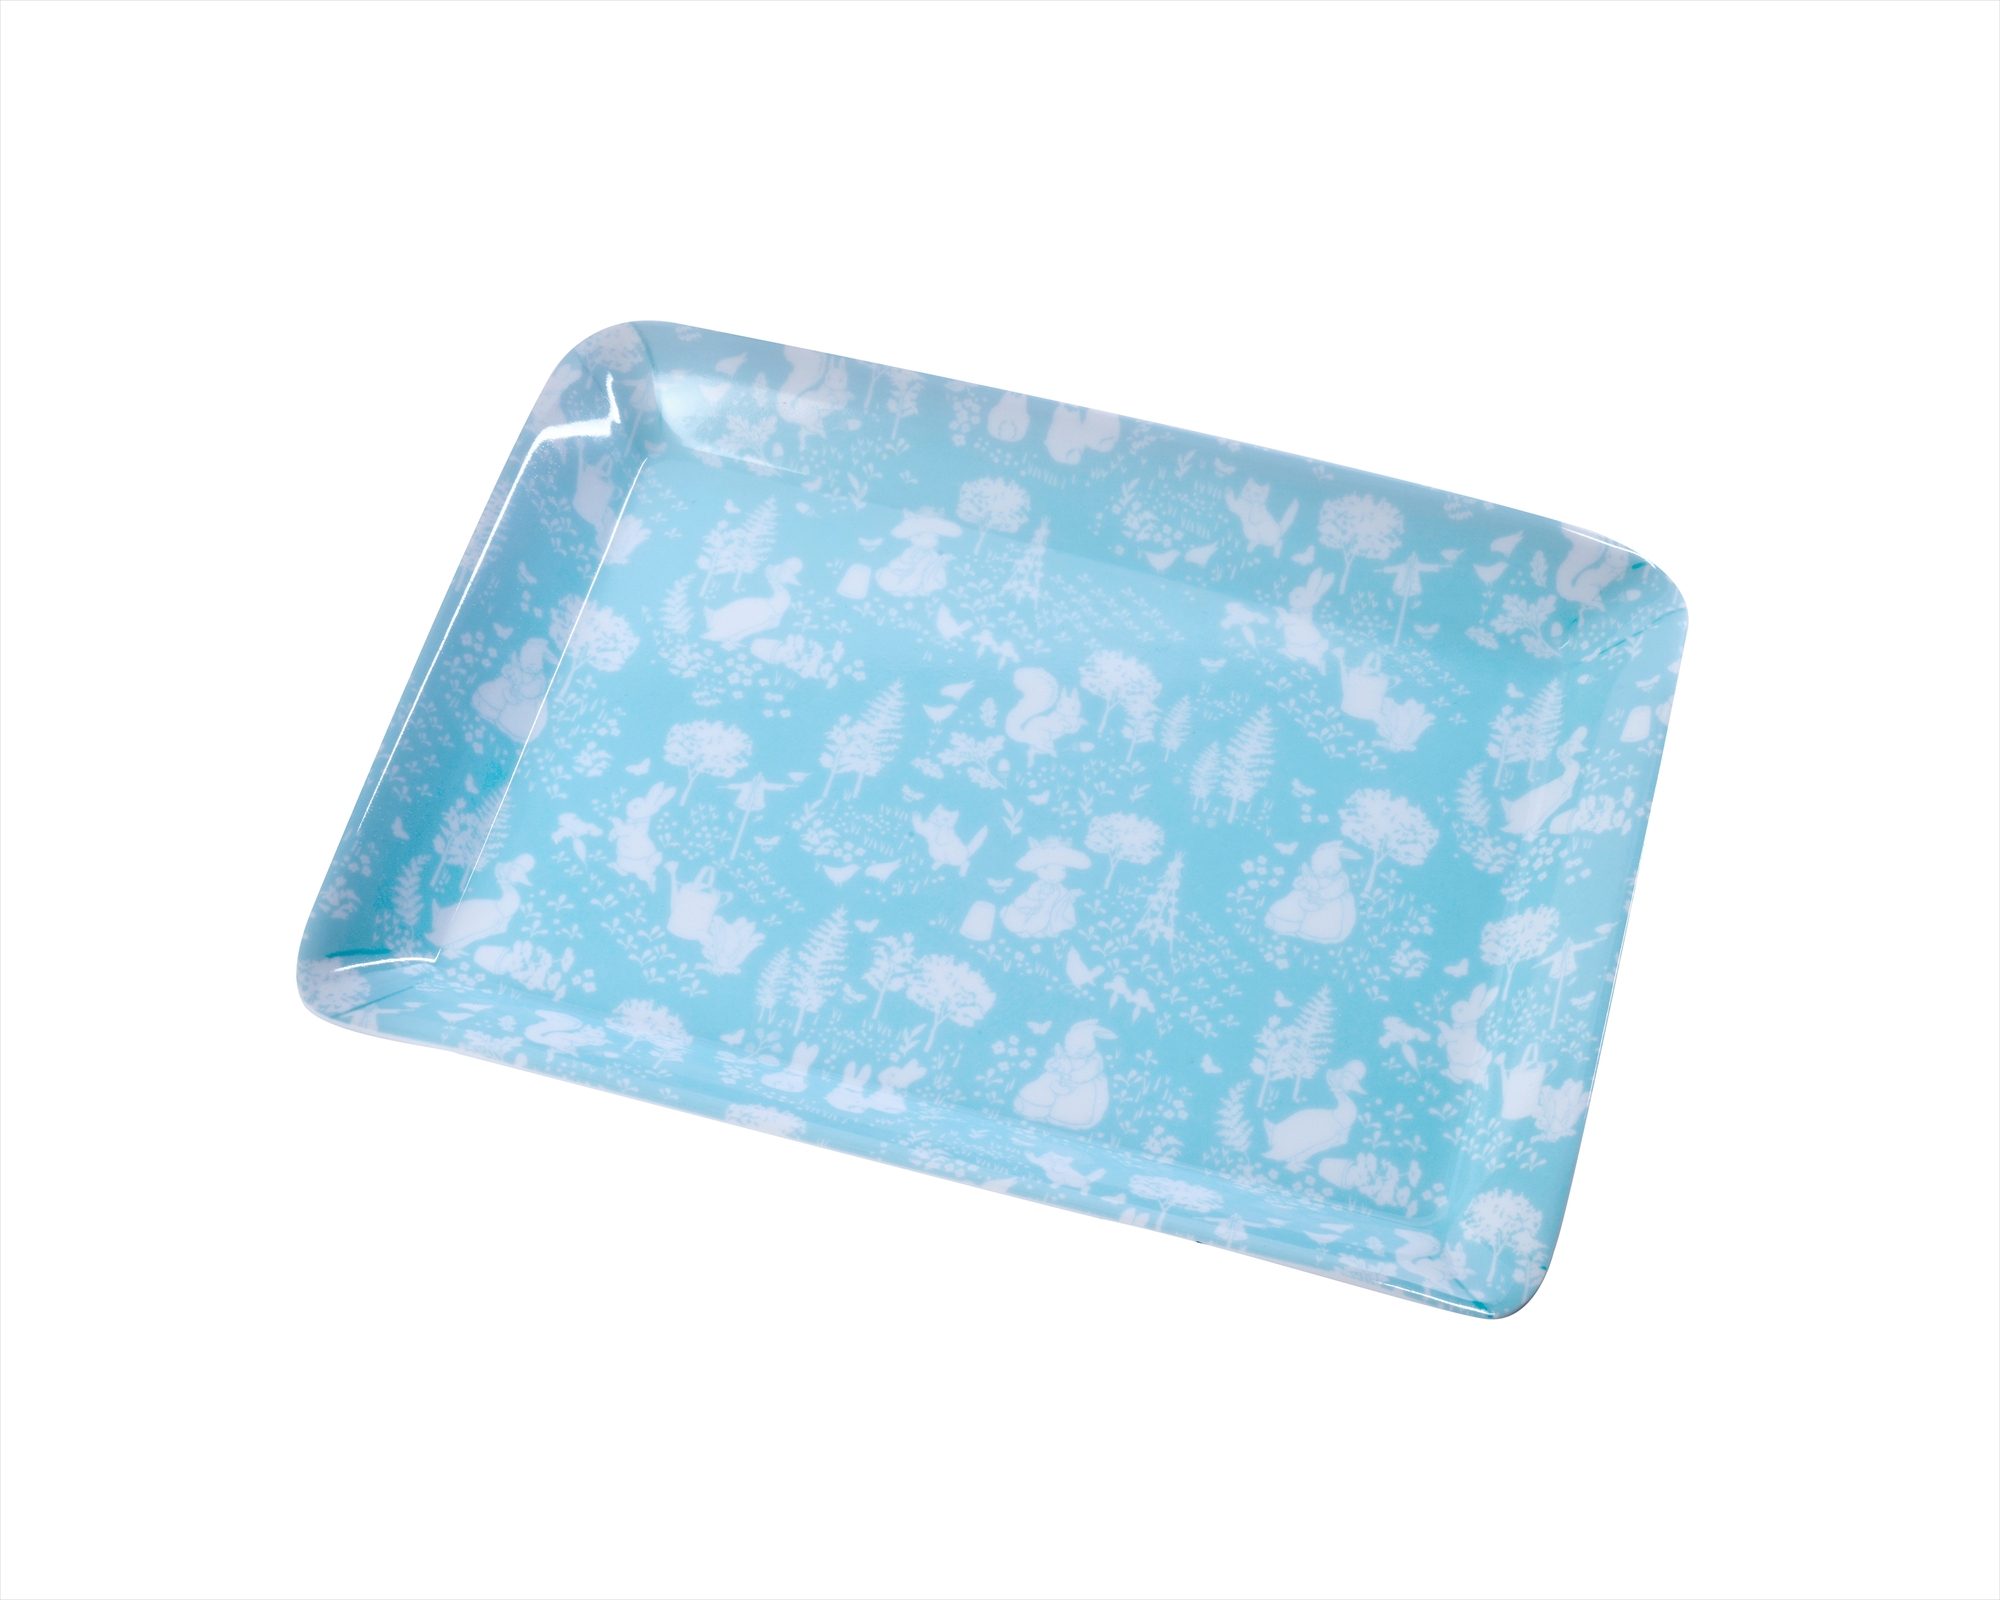 PETER RABBIT CLASSIC LIGHT BLUE SCATTER TRAY